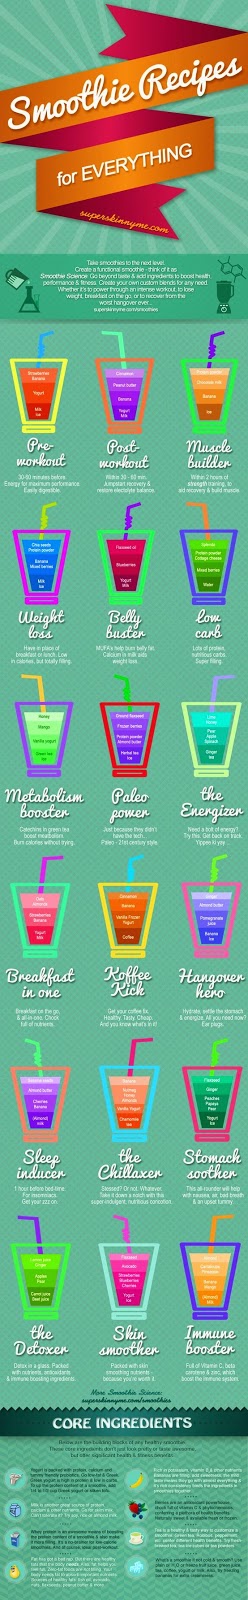 hover_share weight loss - smoothies recipes